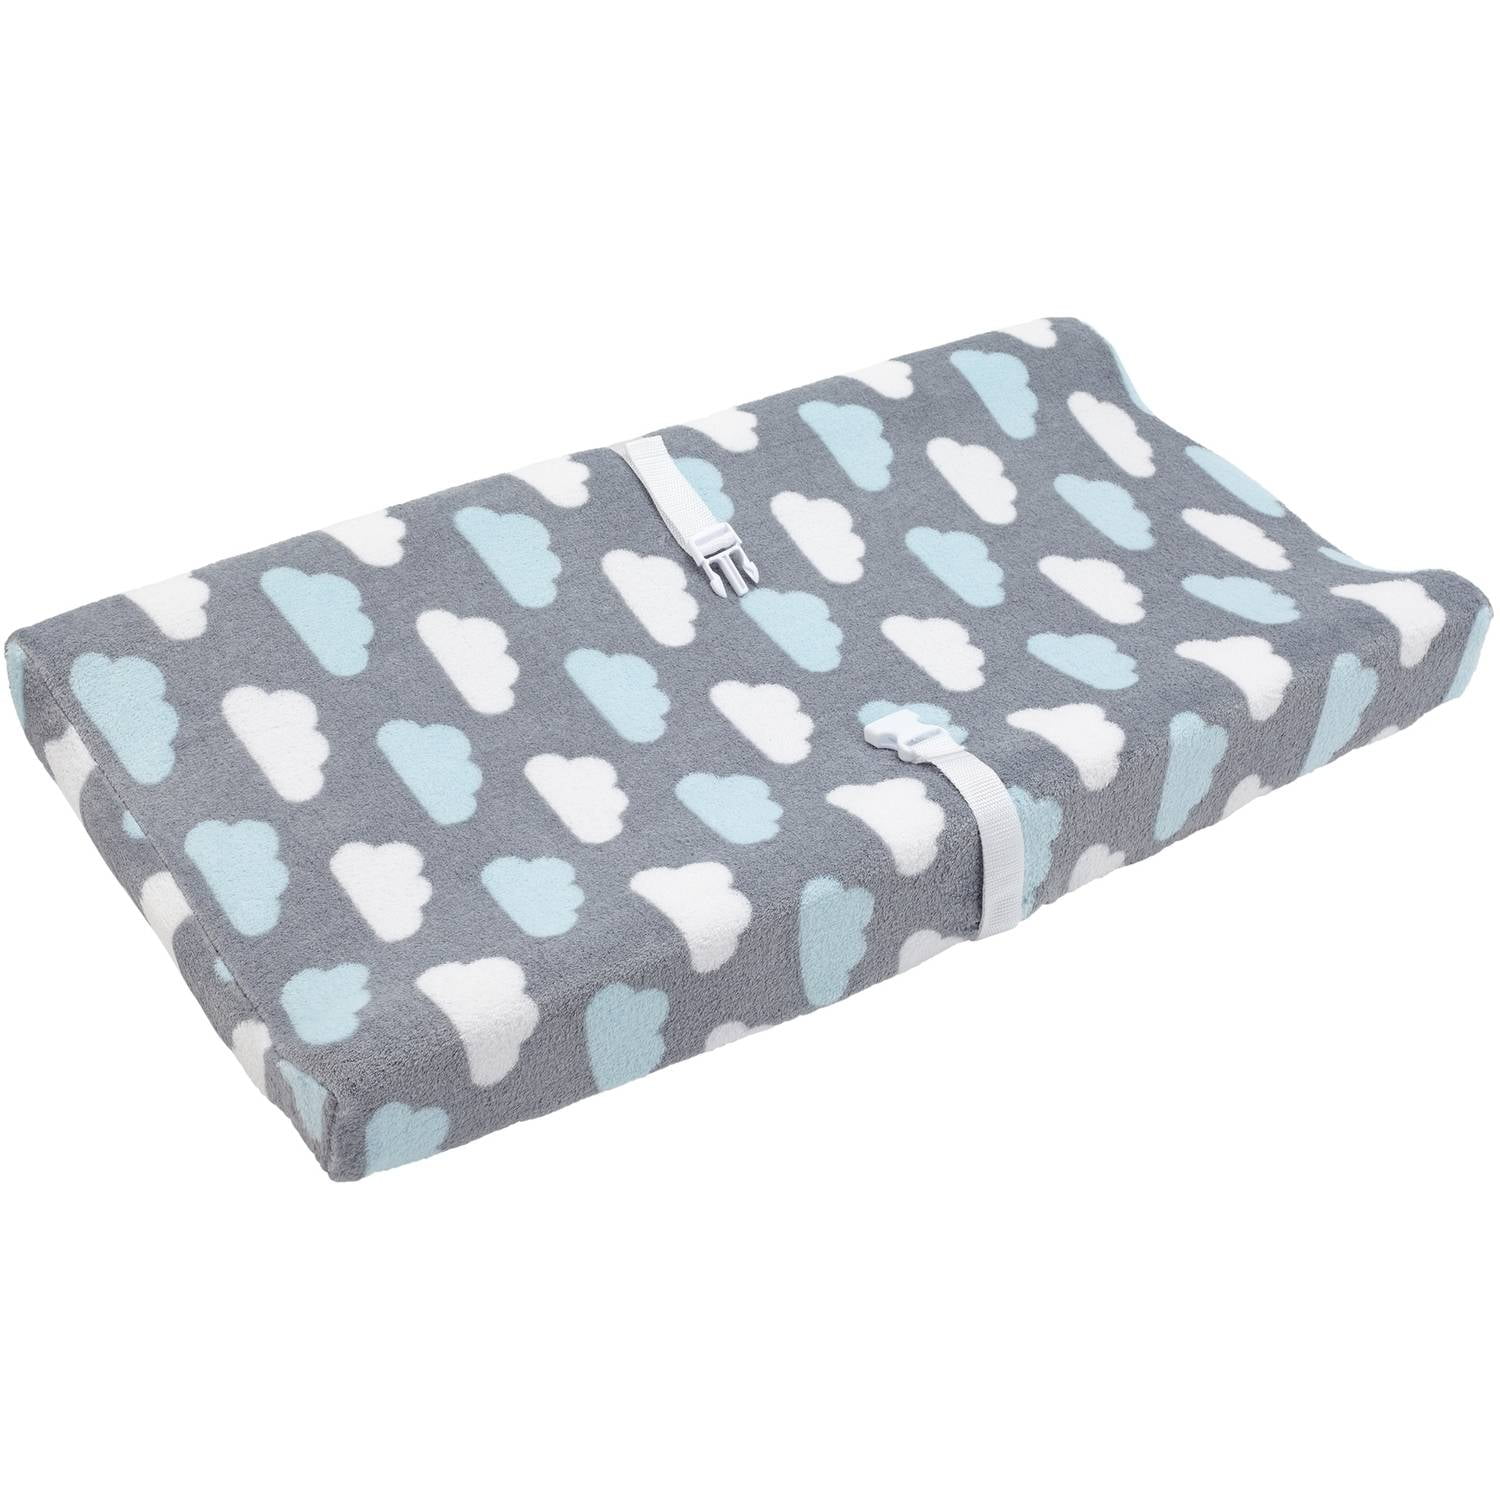 Parent's Choice Changing Pad Cover,Navy Blue Stars see details 